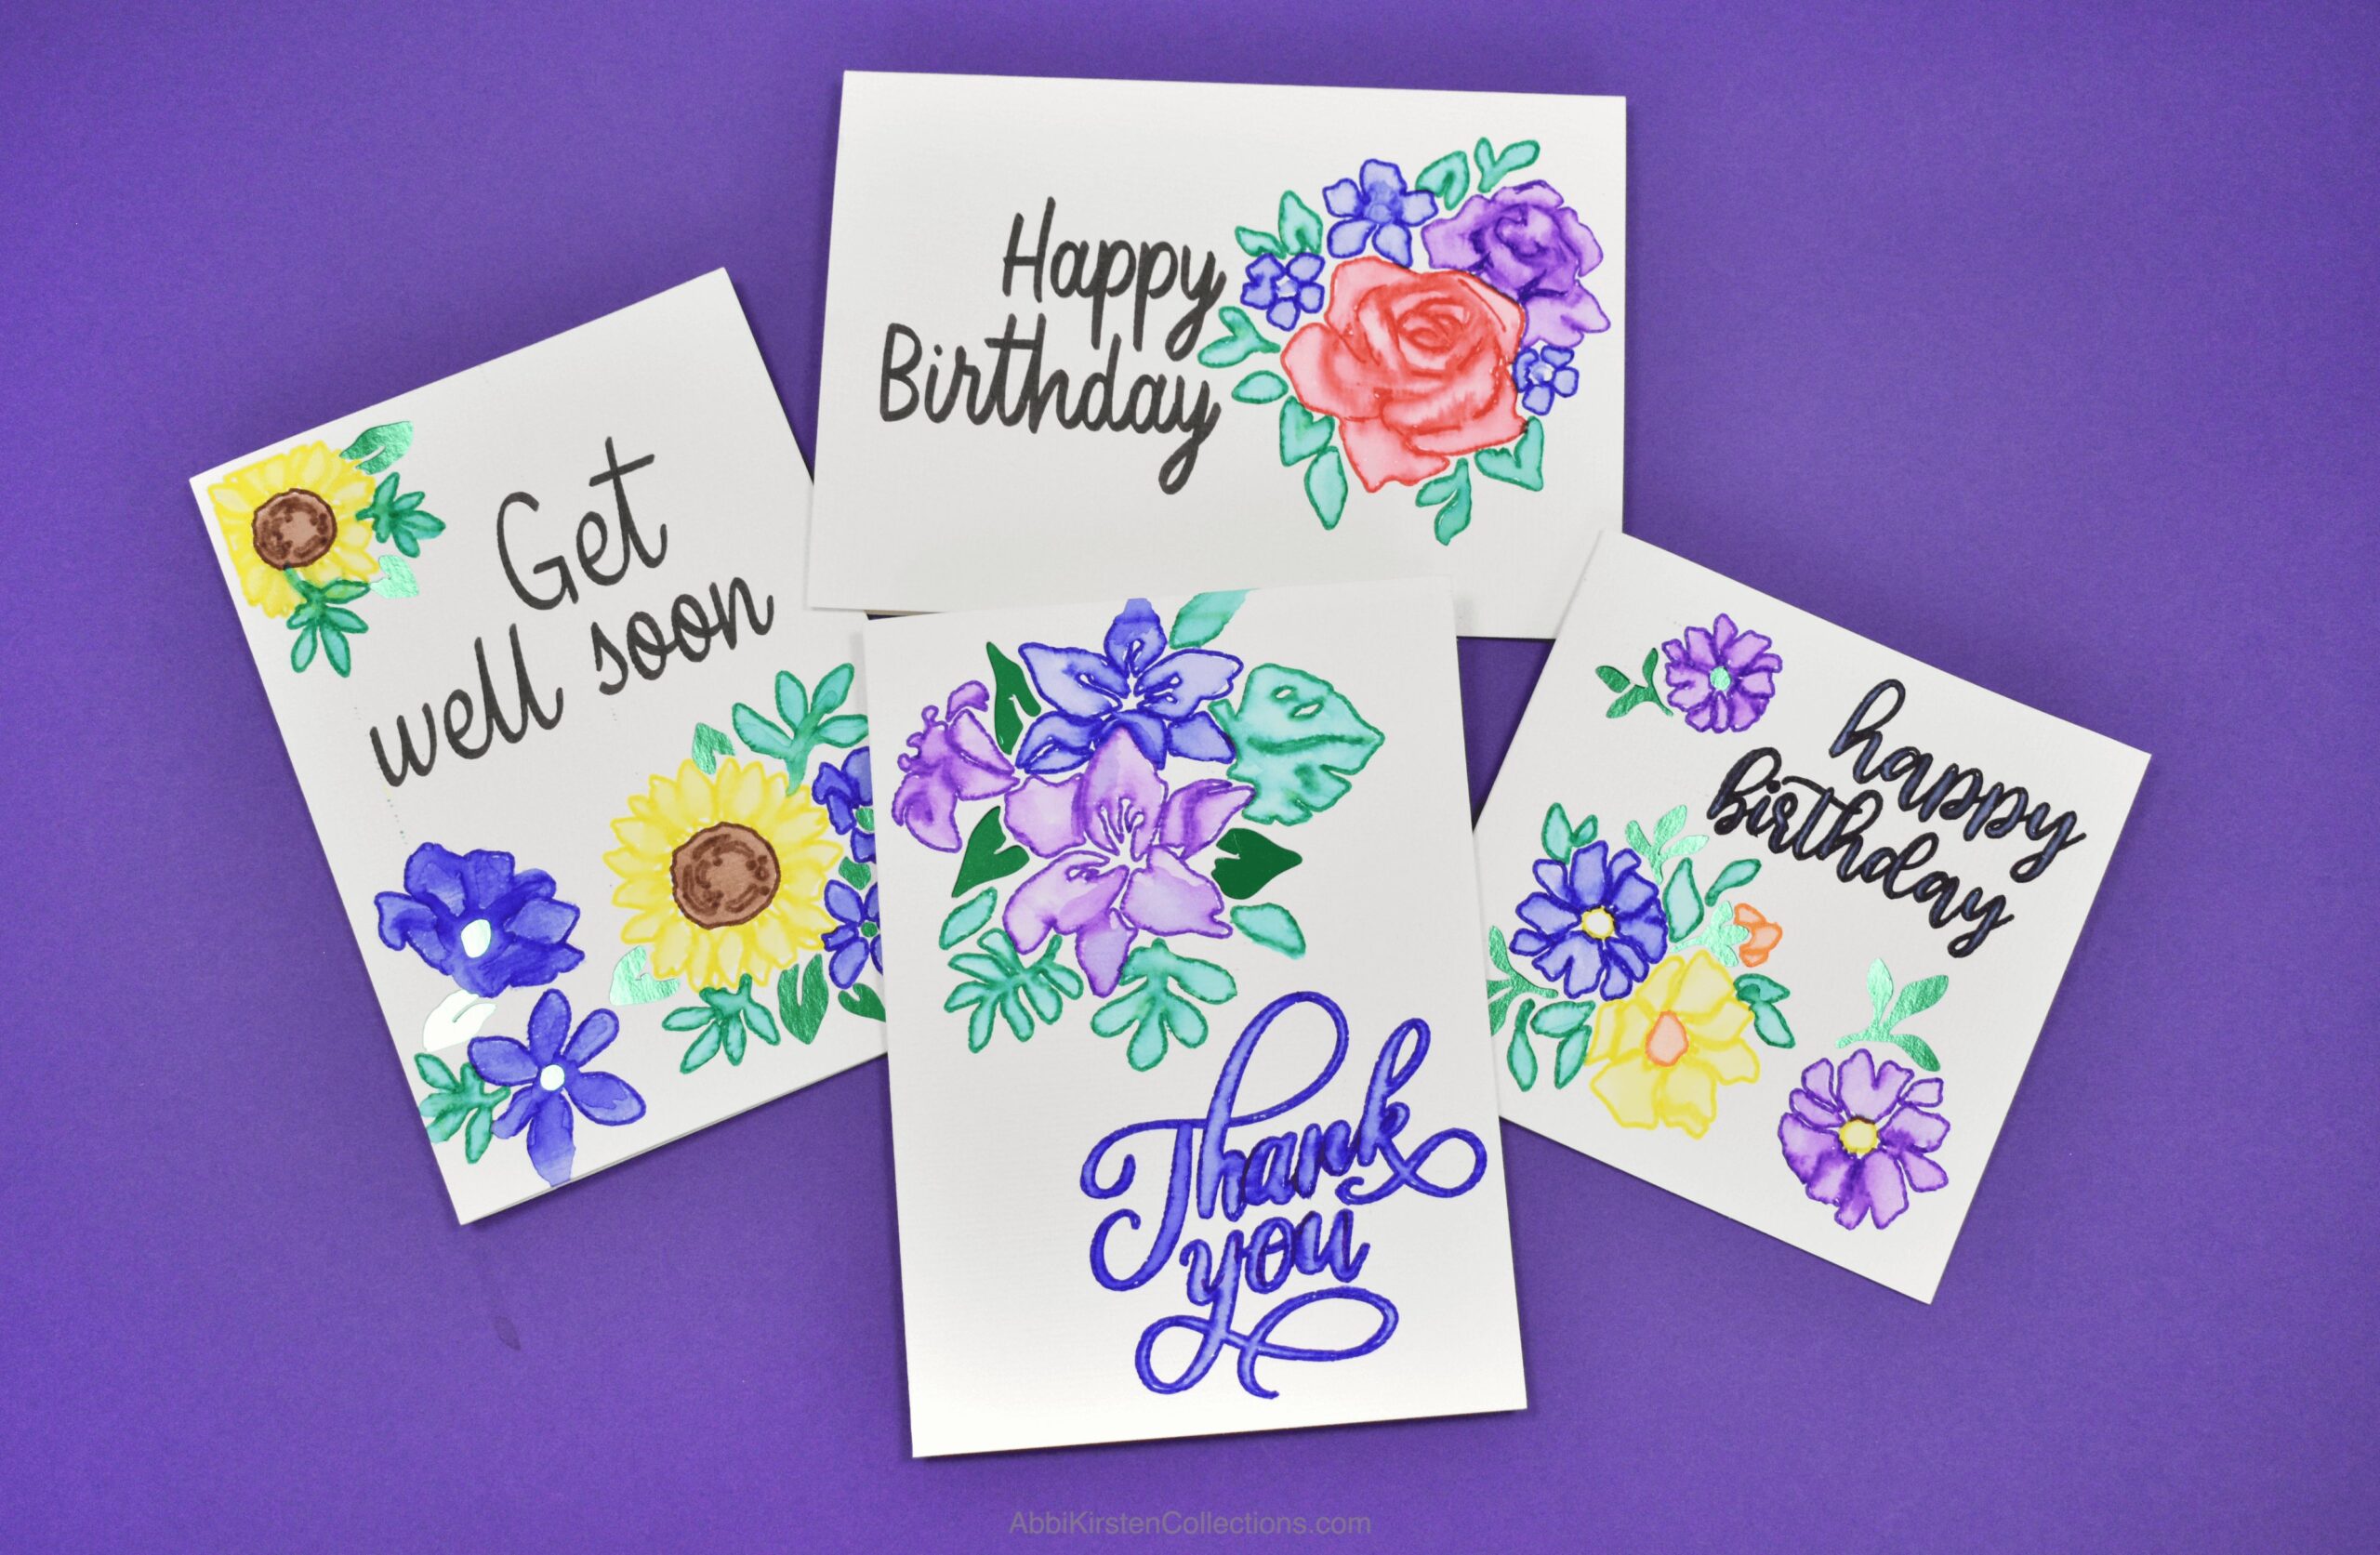 Everything You Need To Know About the New Cricut Watercolor Cards and Watercolor Marker & Brush Set